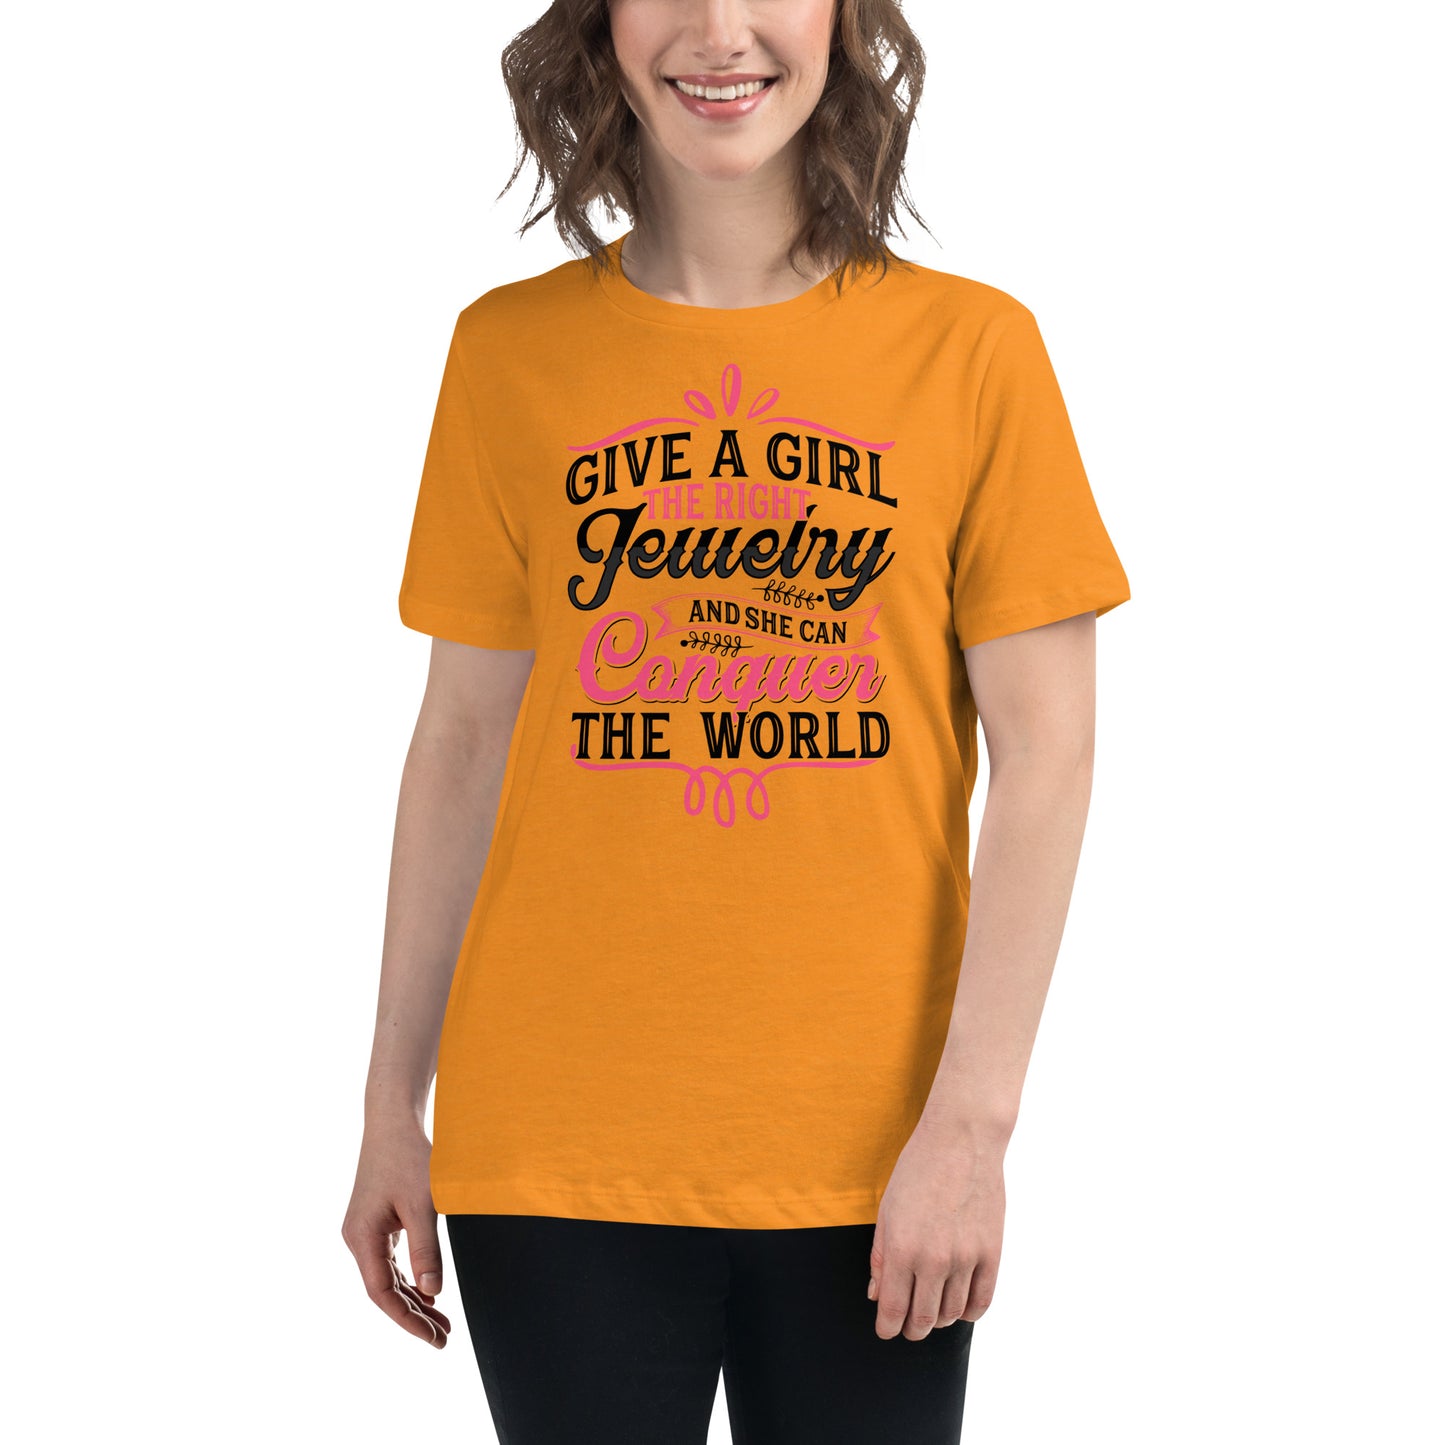 "Give A Girl The Right Jewelry And She Can Conquer The World" Quote Relaxed T-Shirt